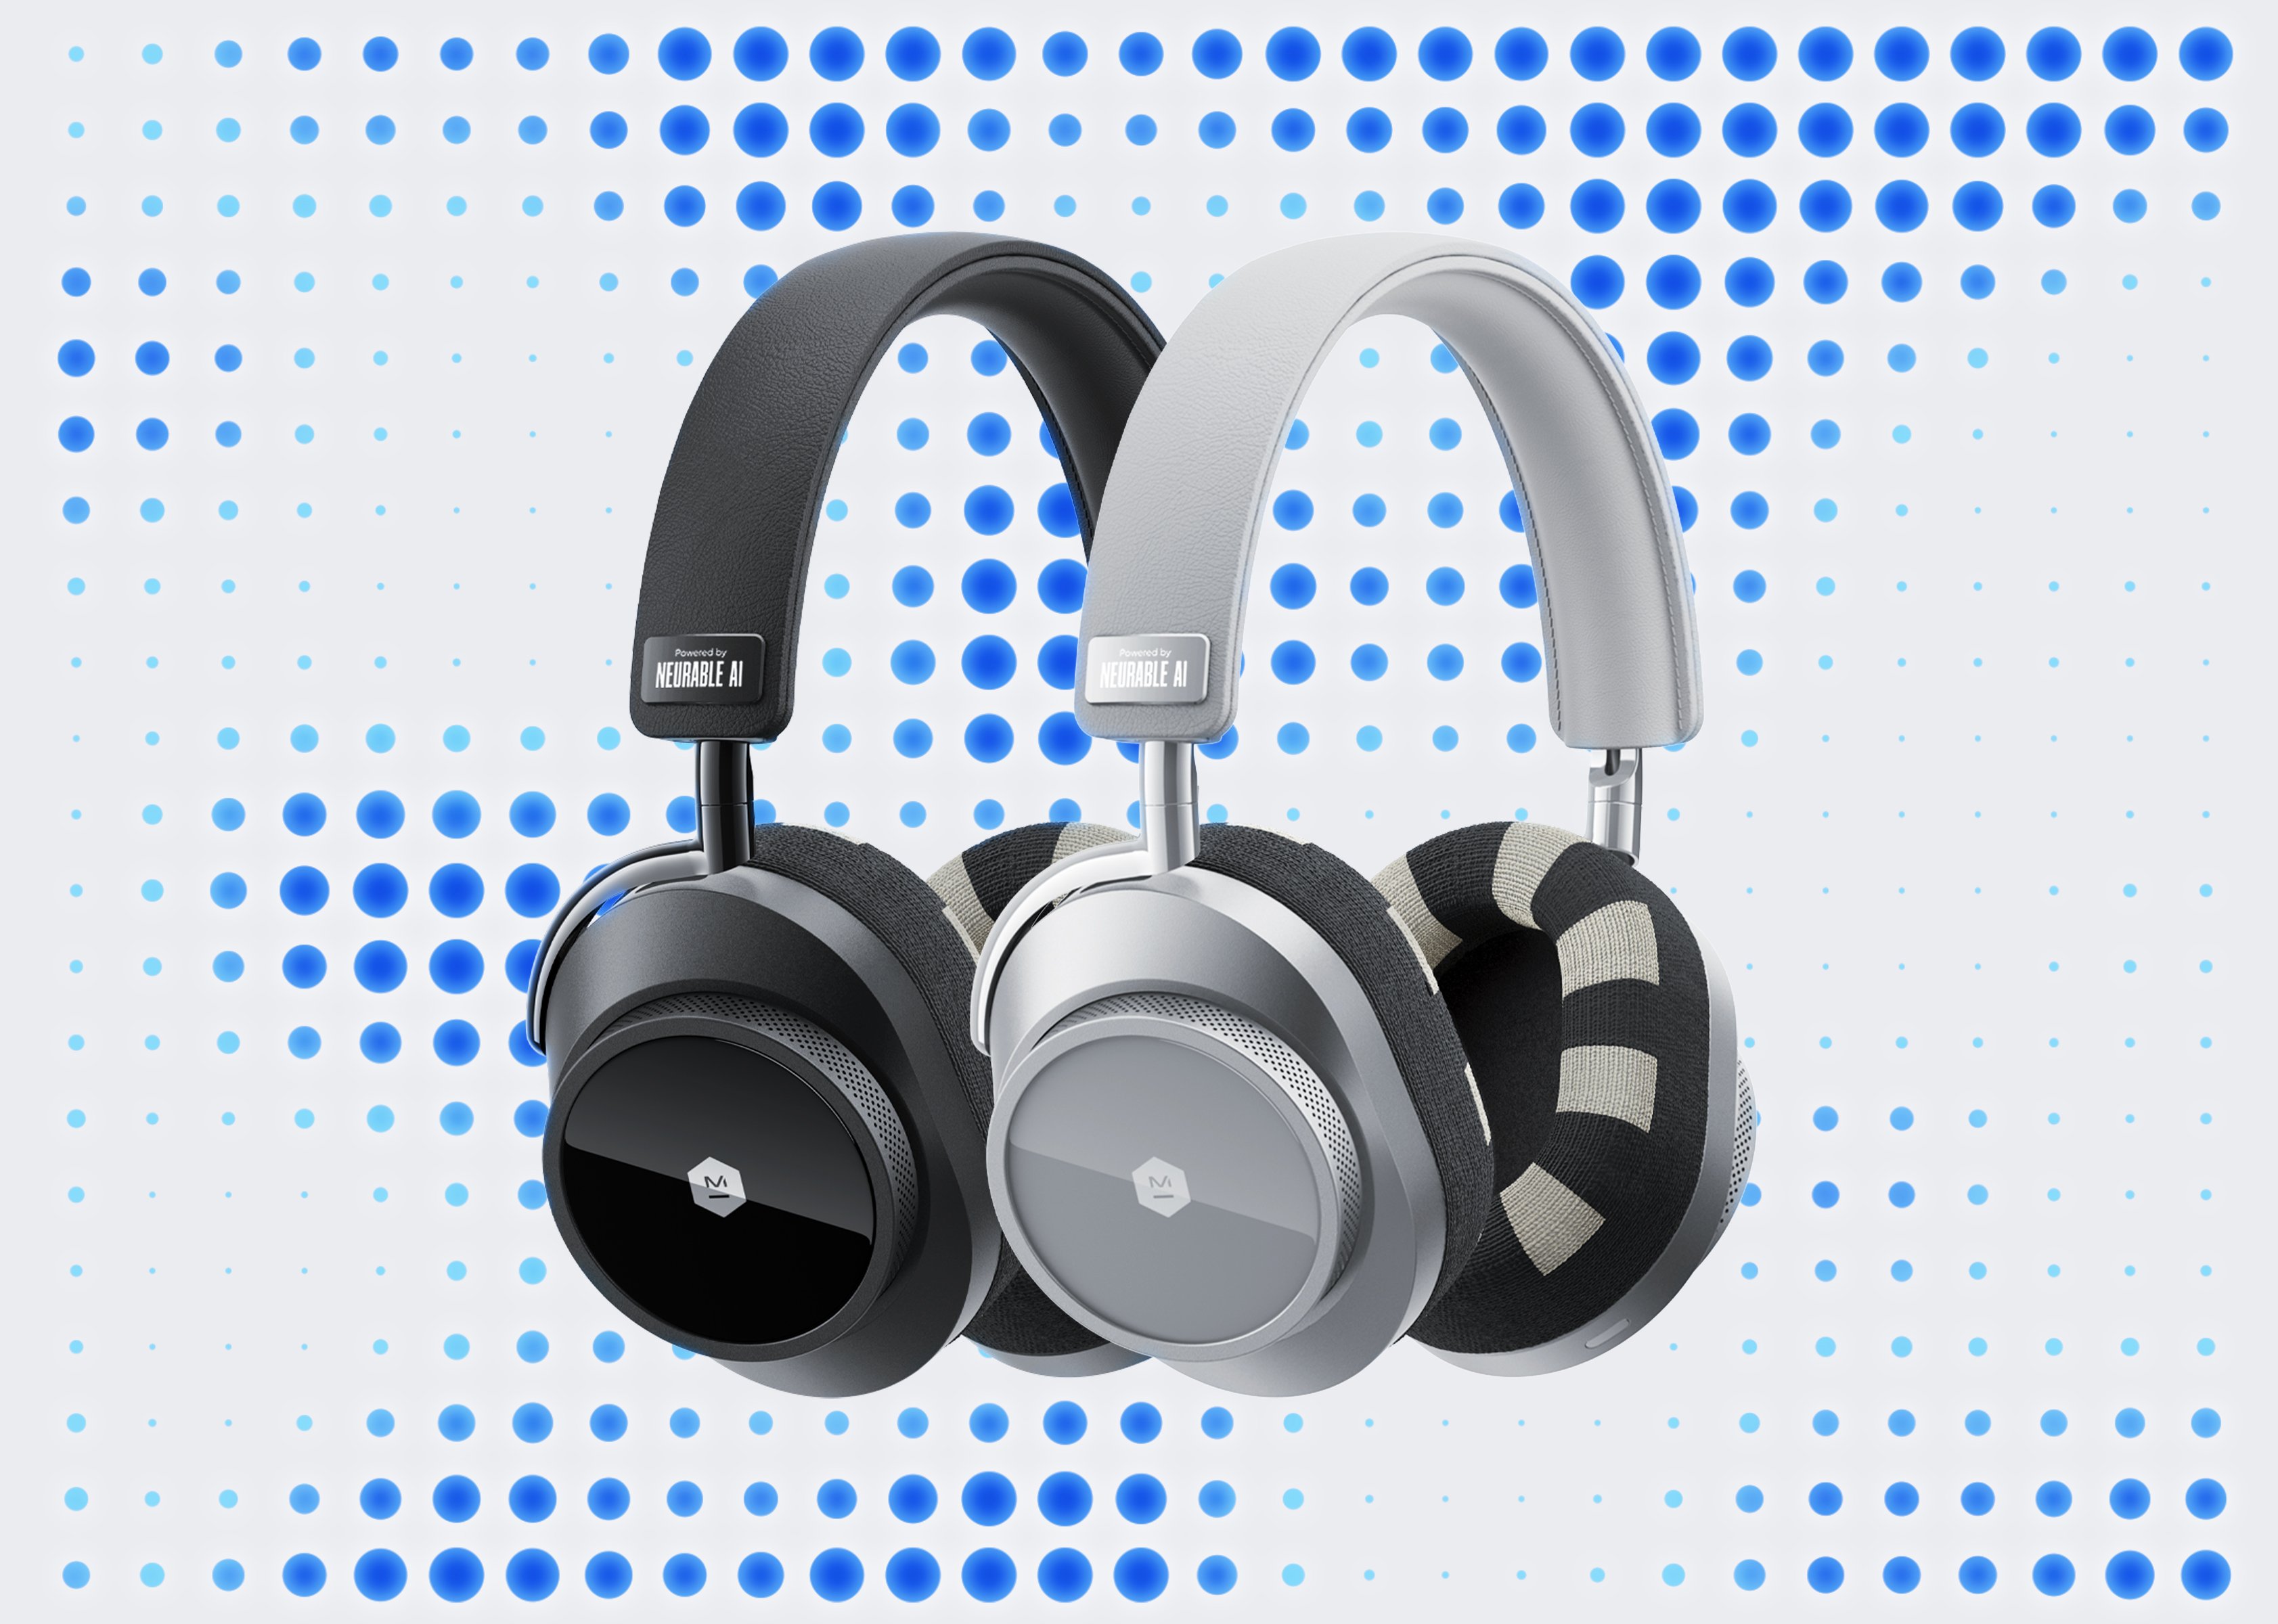 MW75 Neuro Smart EEG Active Noise-Cancelling Wireless Headphones Honored By CES Innovation Awards